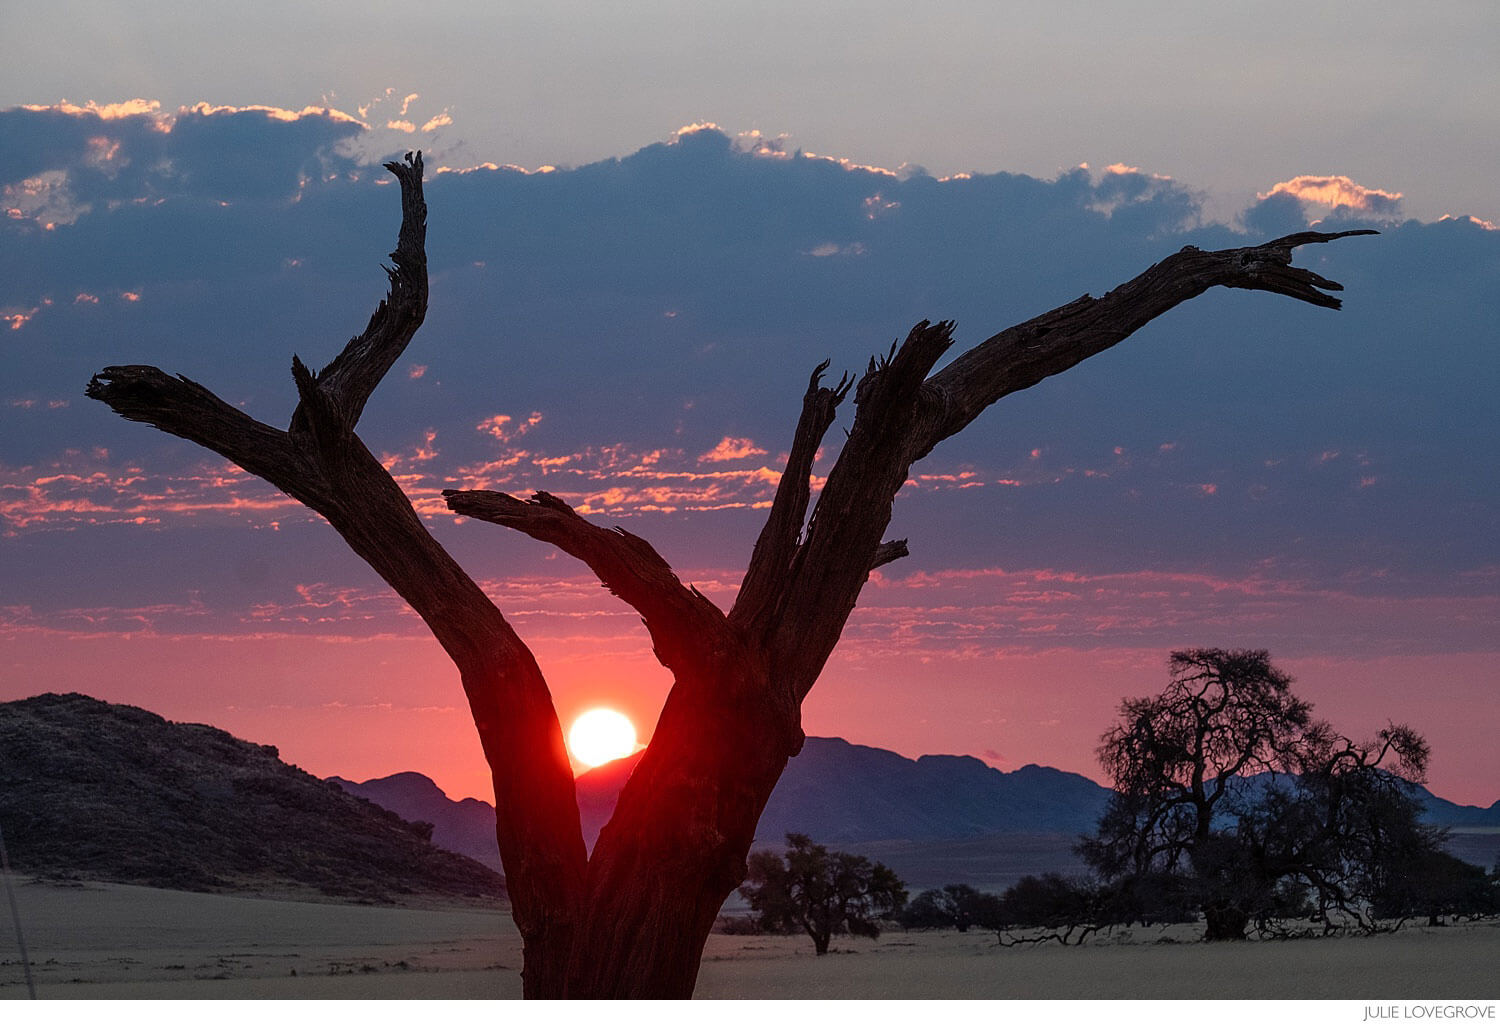 , Namibia 2018 &#8211; Landscapes and fascinating places